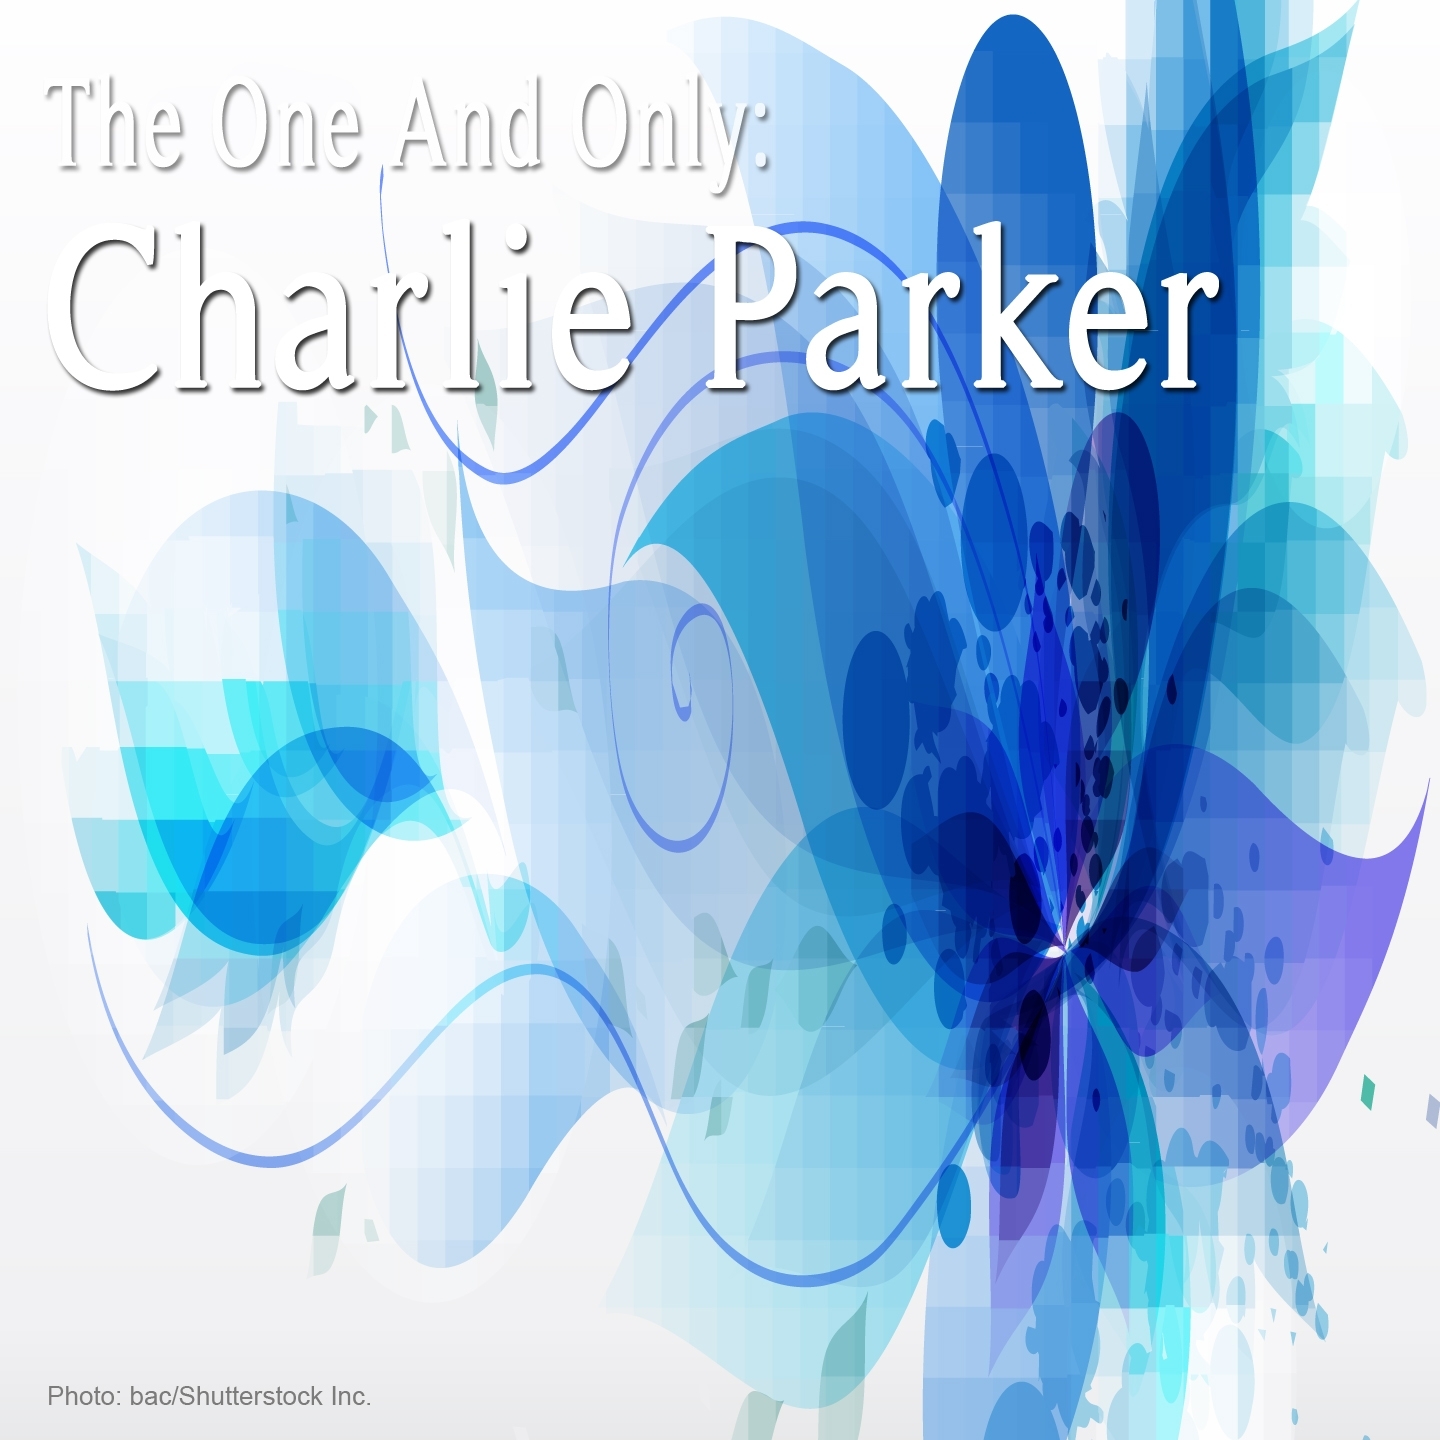 The One and Only: Charlie Parker